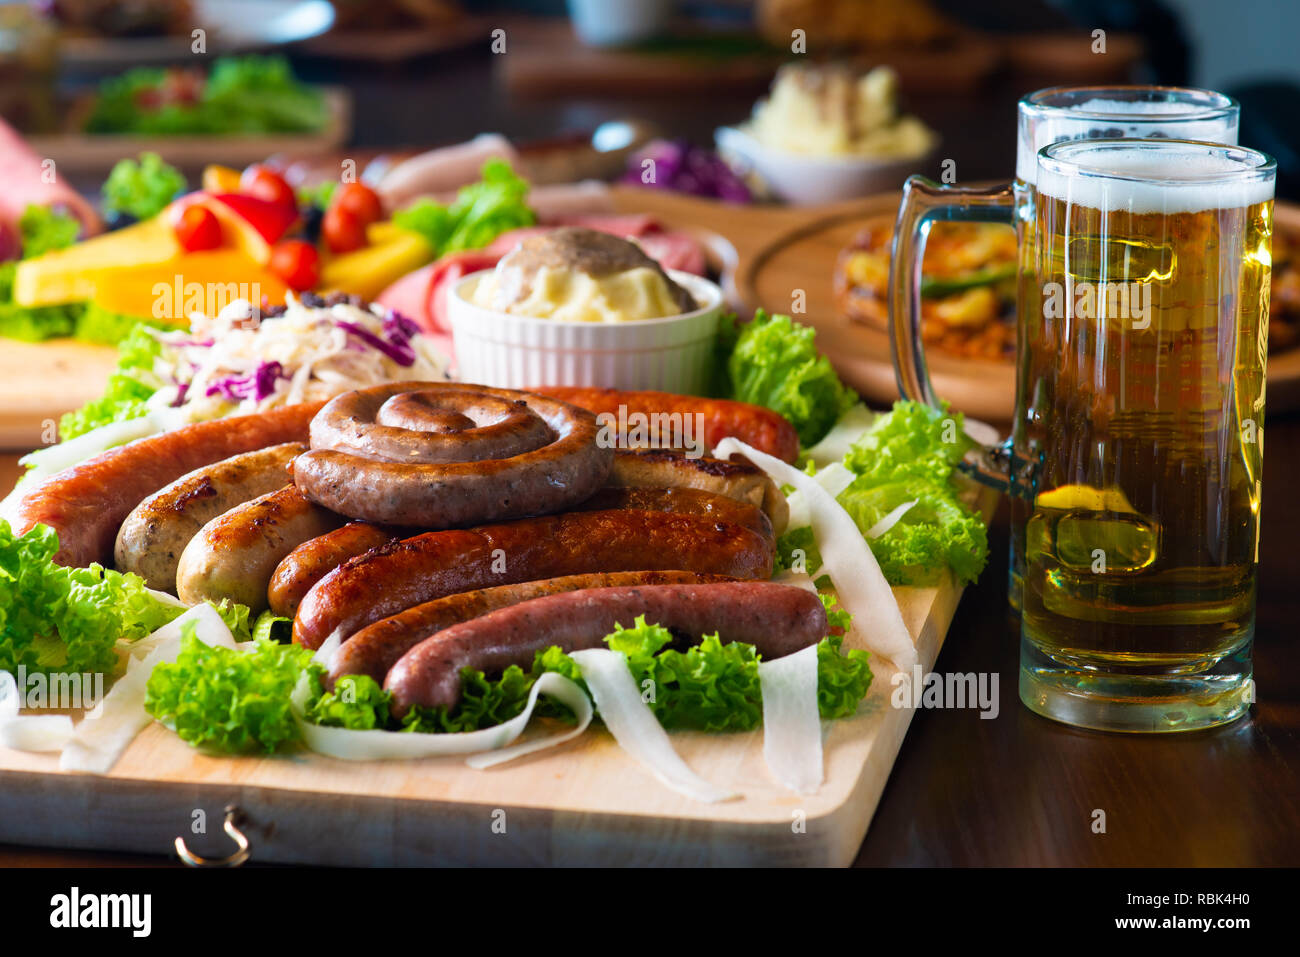 Bavarian veal sausage breakfast with sausages, soft pretzel and mild mustard on wooden board Stock Photo